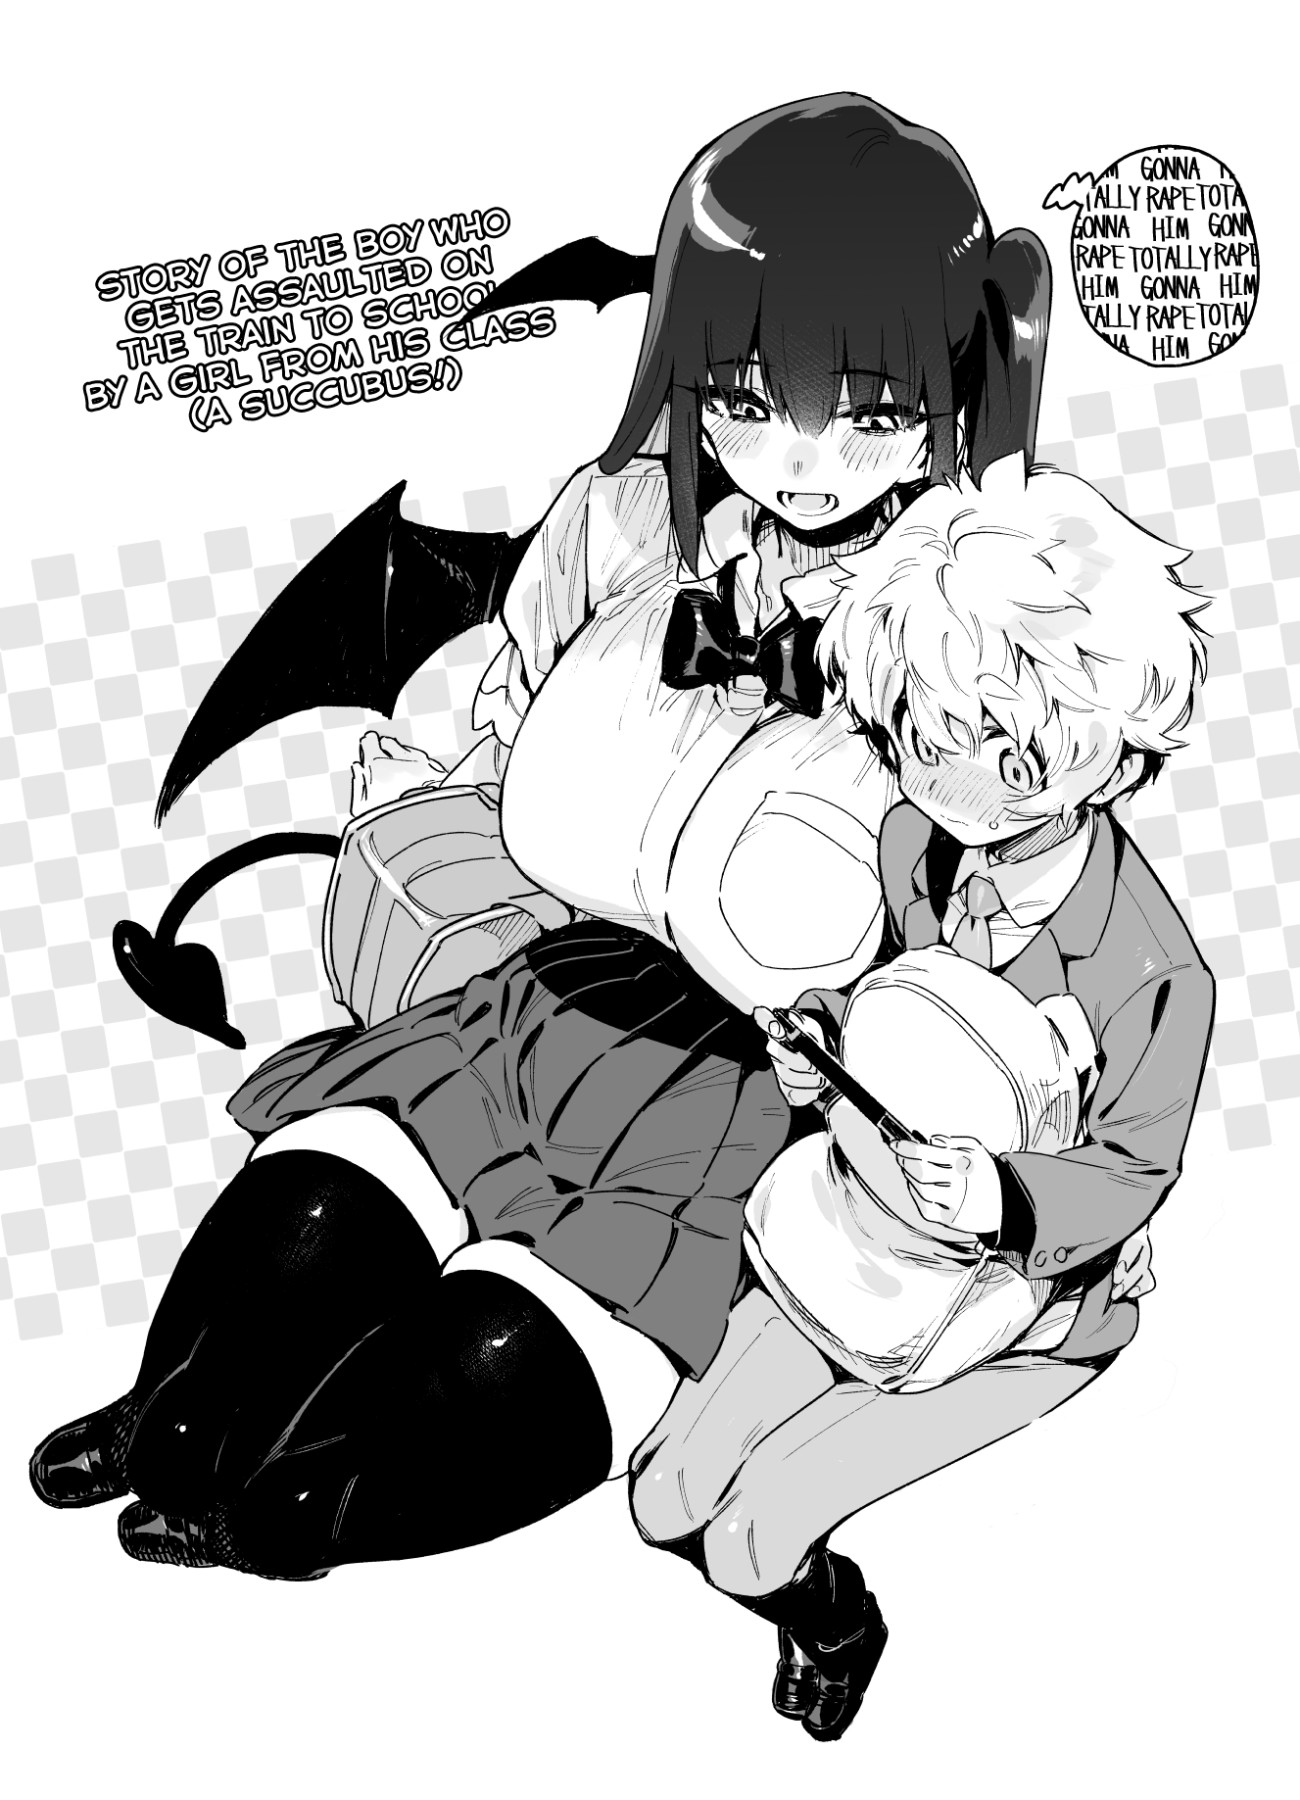 Hentai Manga Comic-Story of the Boy Who Gets Assaulted on the Train to School by a Girl from His Class-Read-2